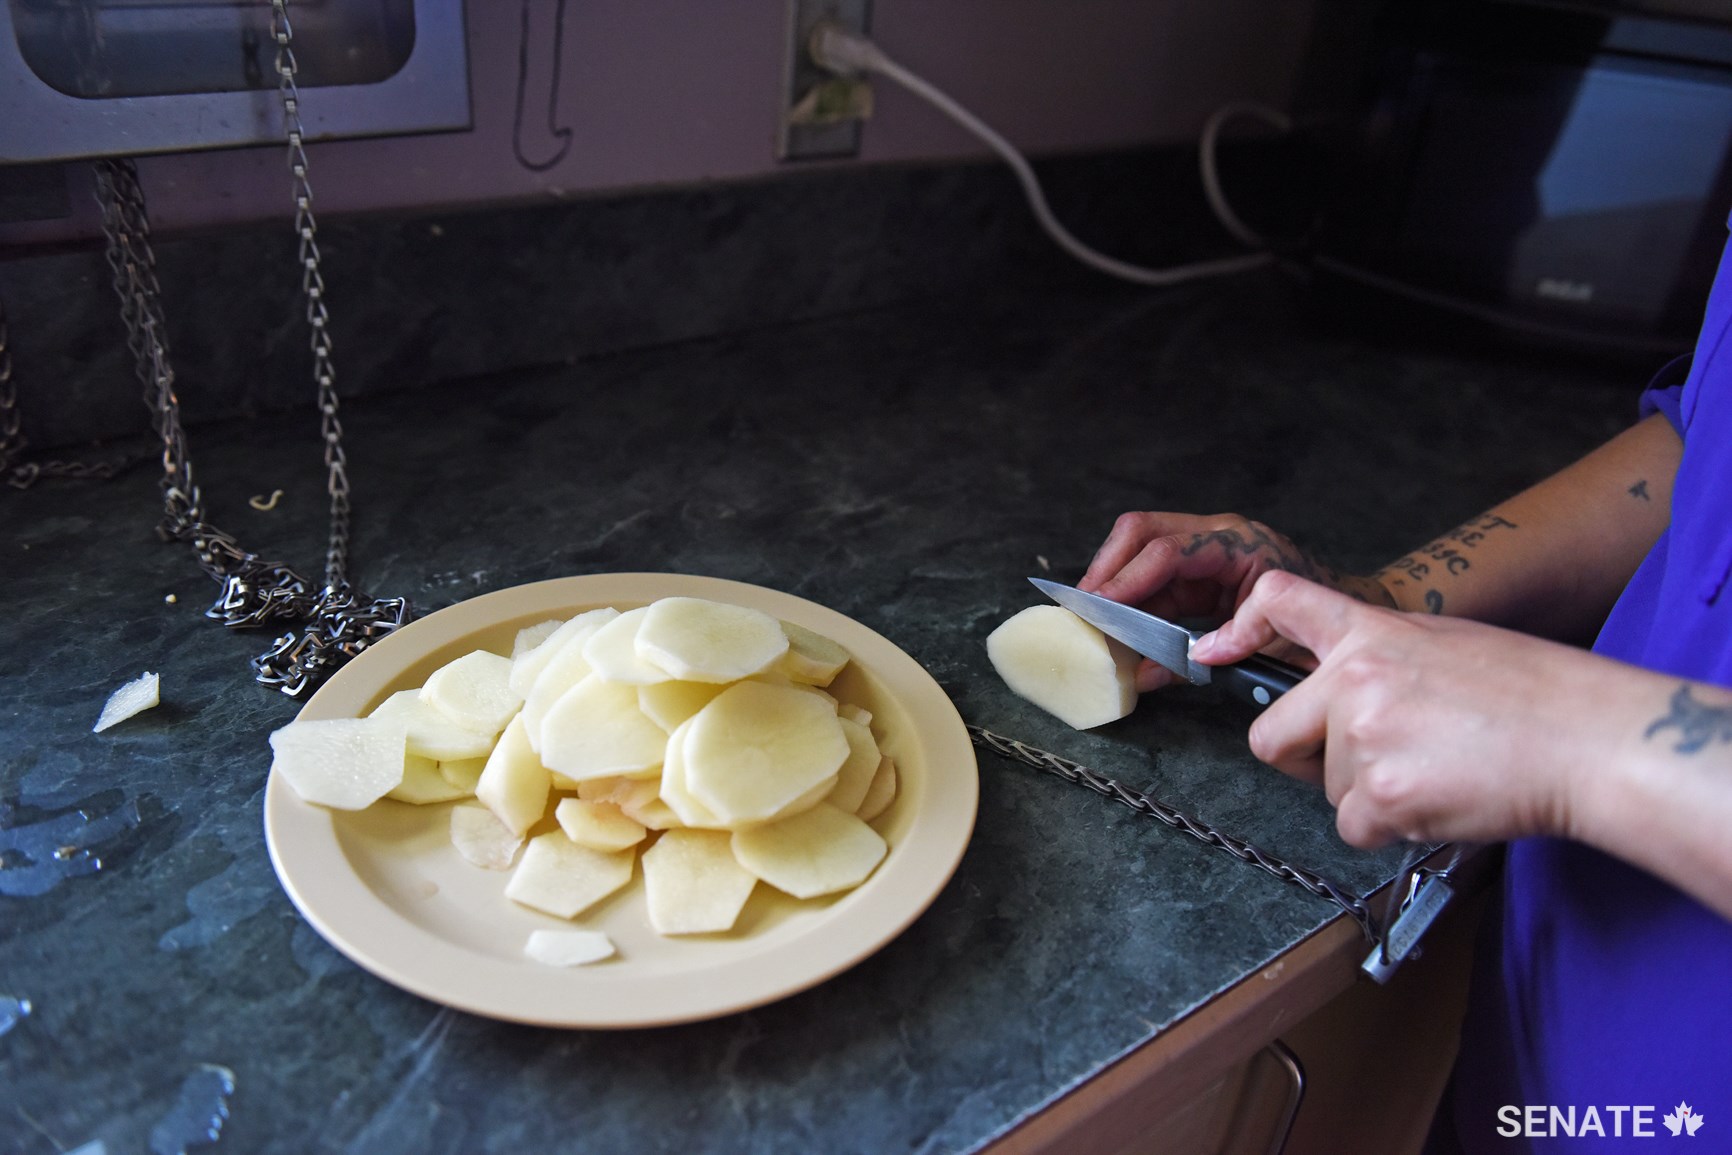 A woman in a medium-security Pathways house — a program for Indigenous prisoners —prepares fried potatoes with a chained-up knife. She was cooking to share with the 10 other women in her unit. To be eligible to live in this unit, Correctional Service Canada requires women to demonstrate readiness and commitment to rehabilitation; the next step from this unit is usually for the person to be reclassified and transferred to minimum security or released.